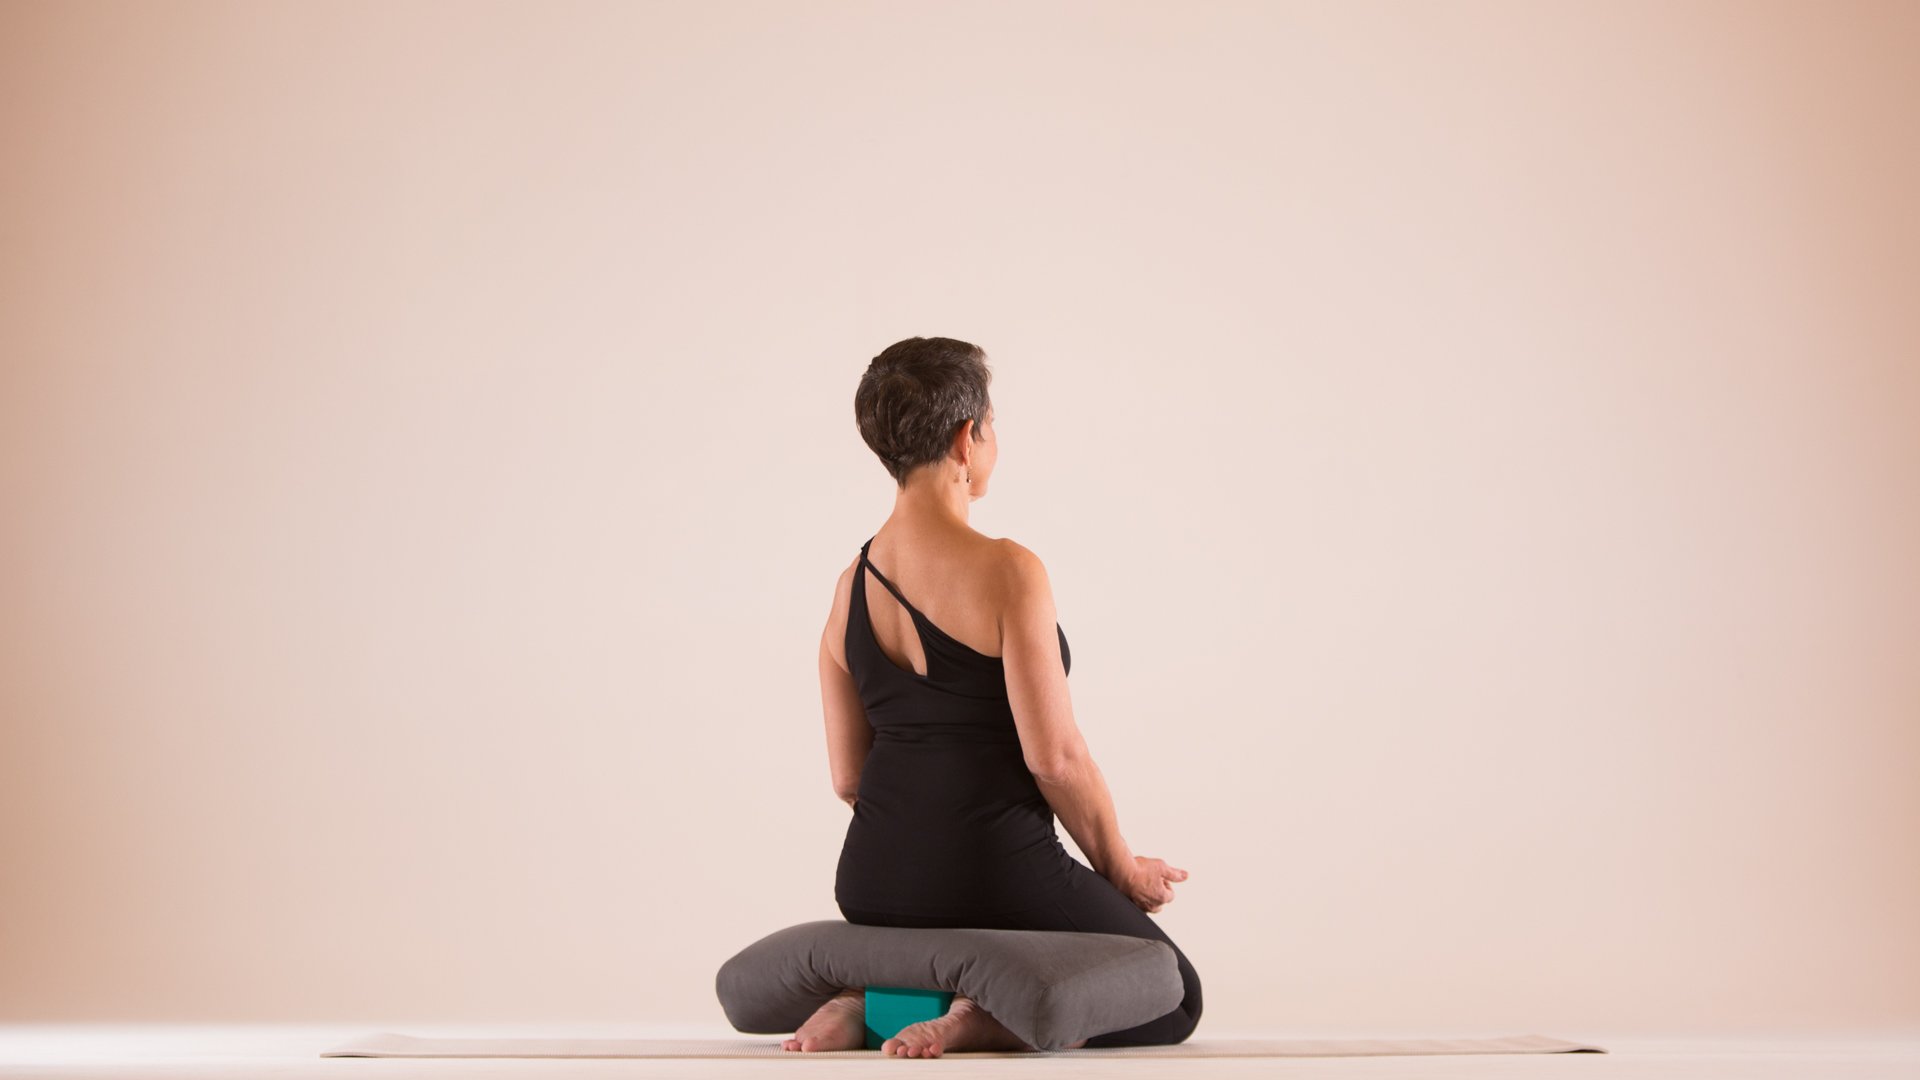 Backbend yoga poses stretch your knees